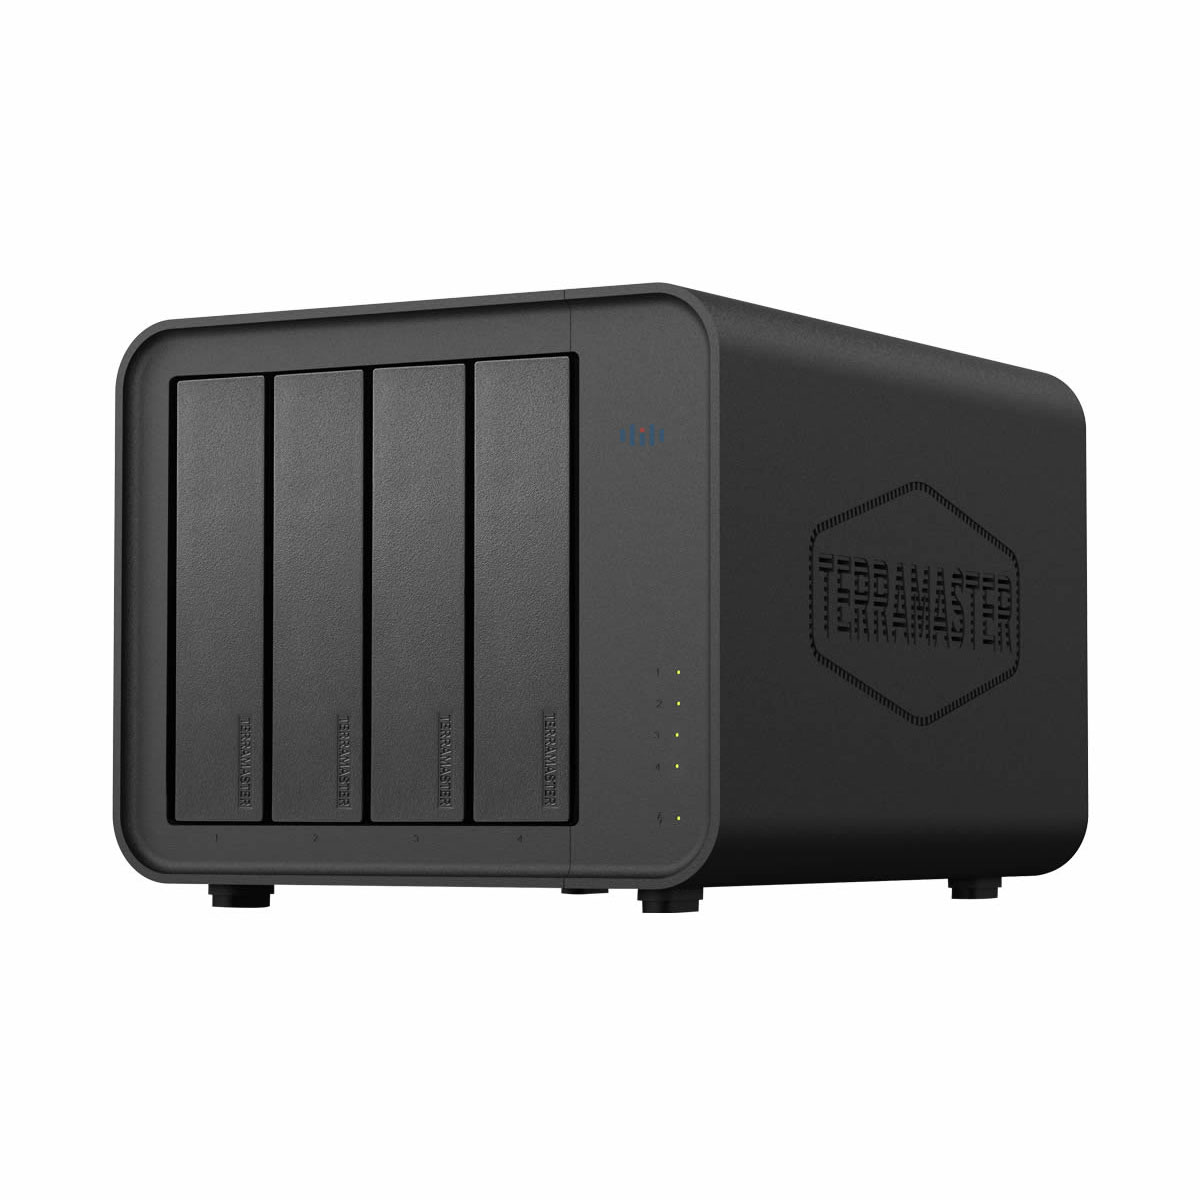 TerraMaster F4-424 all in one 4Bay NAS